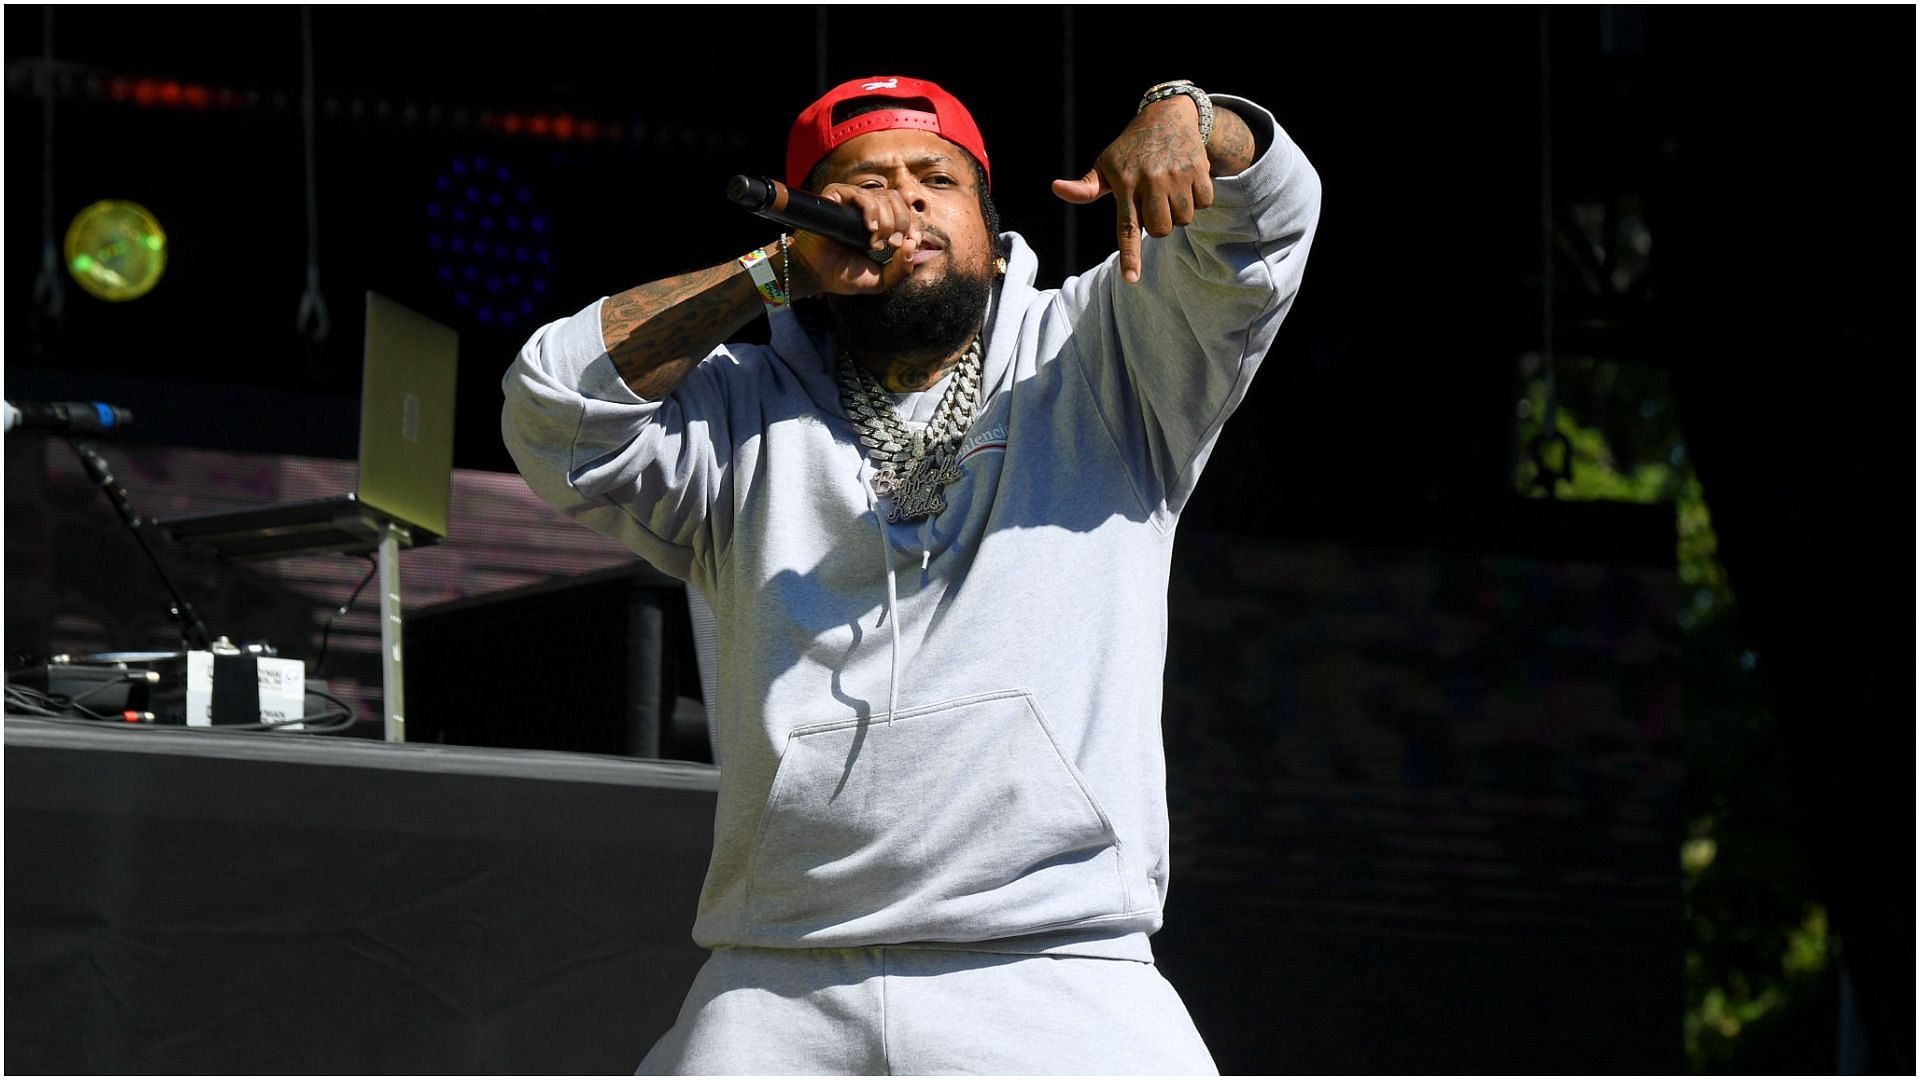 Westside Gunn was recently taken to the hospital (Image by Kevin Mazur via Getty Images)